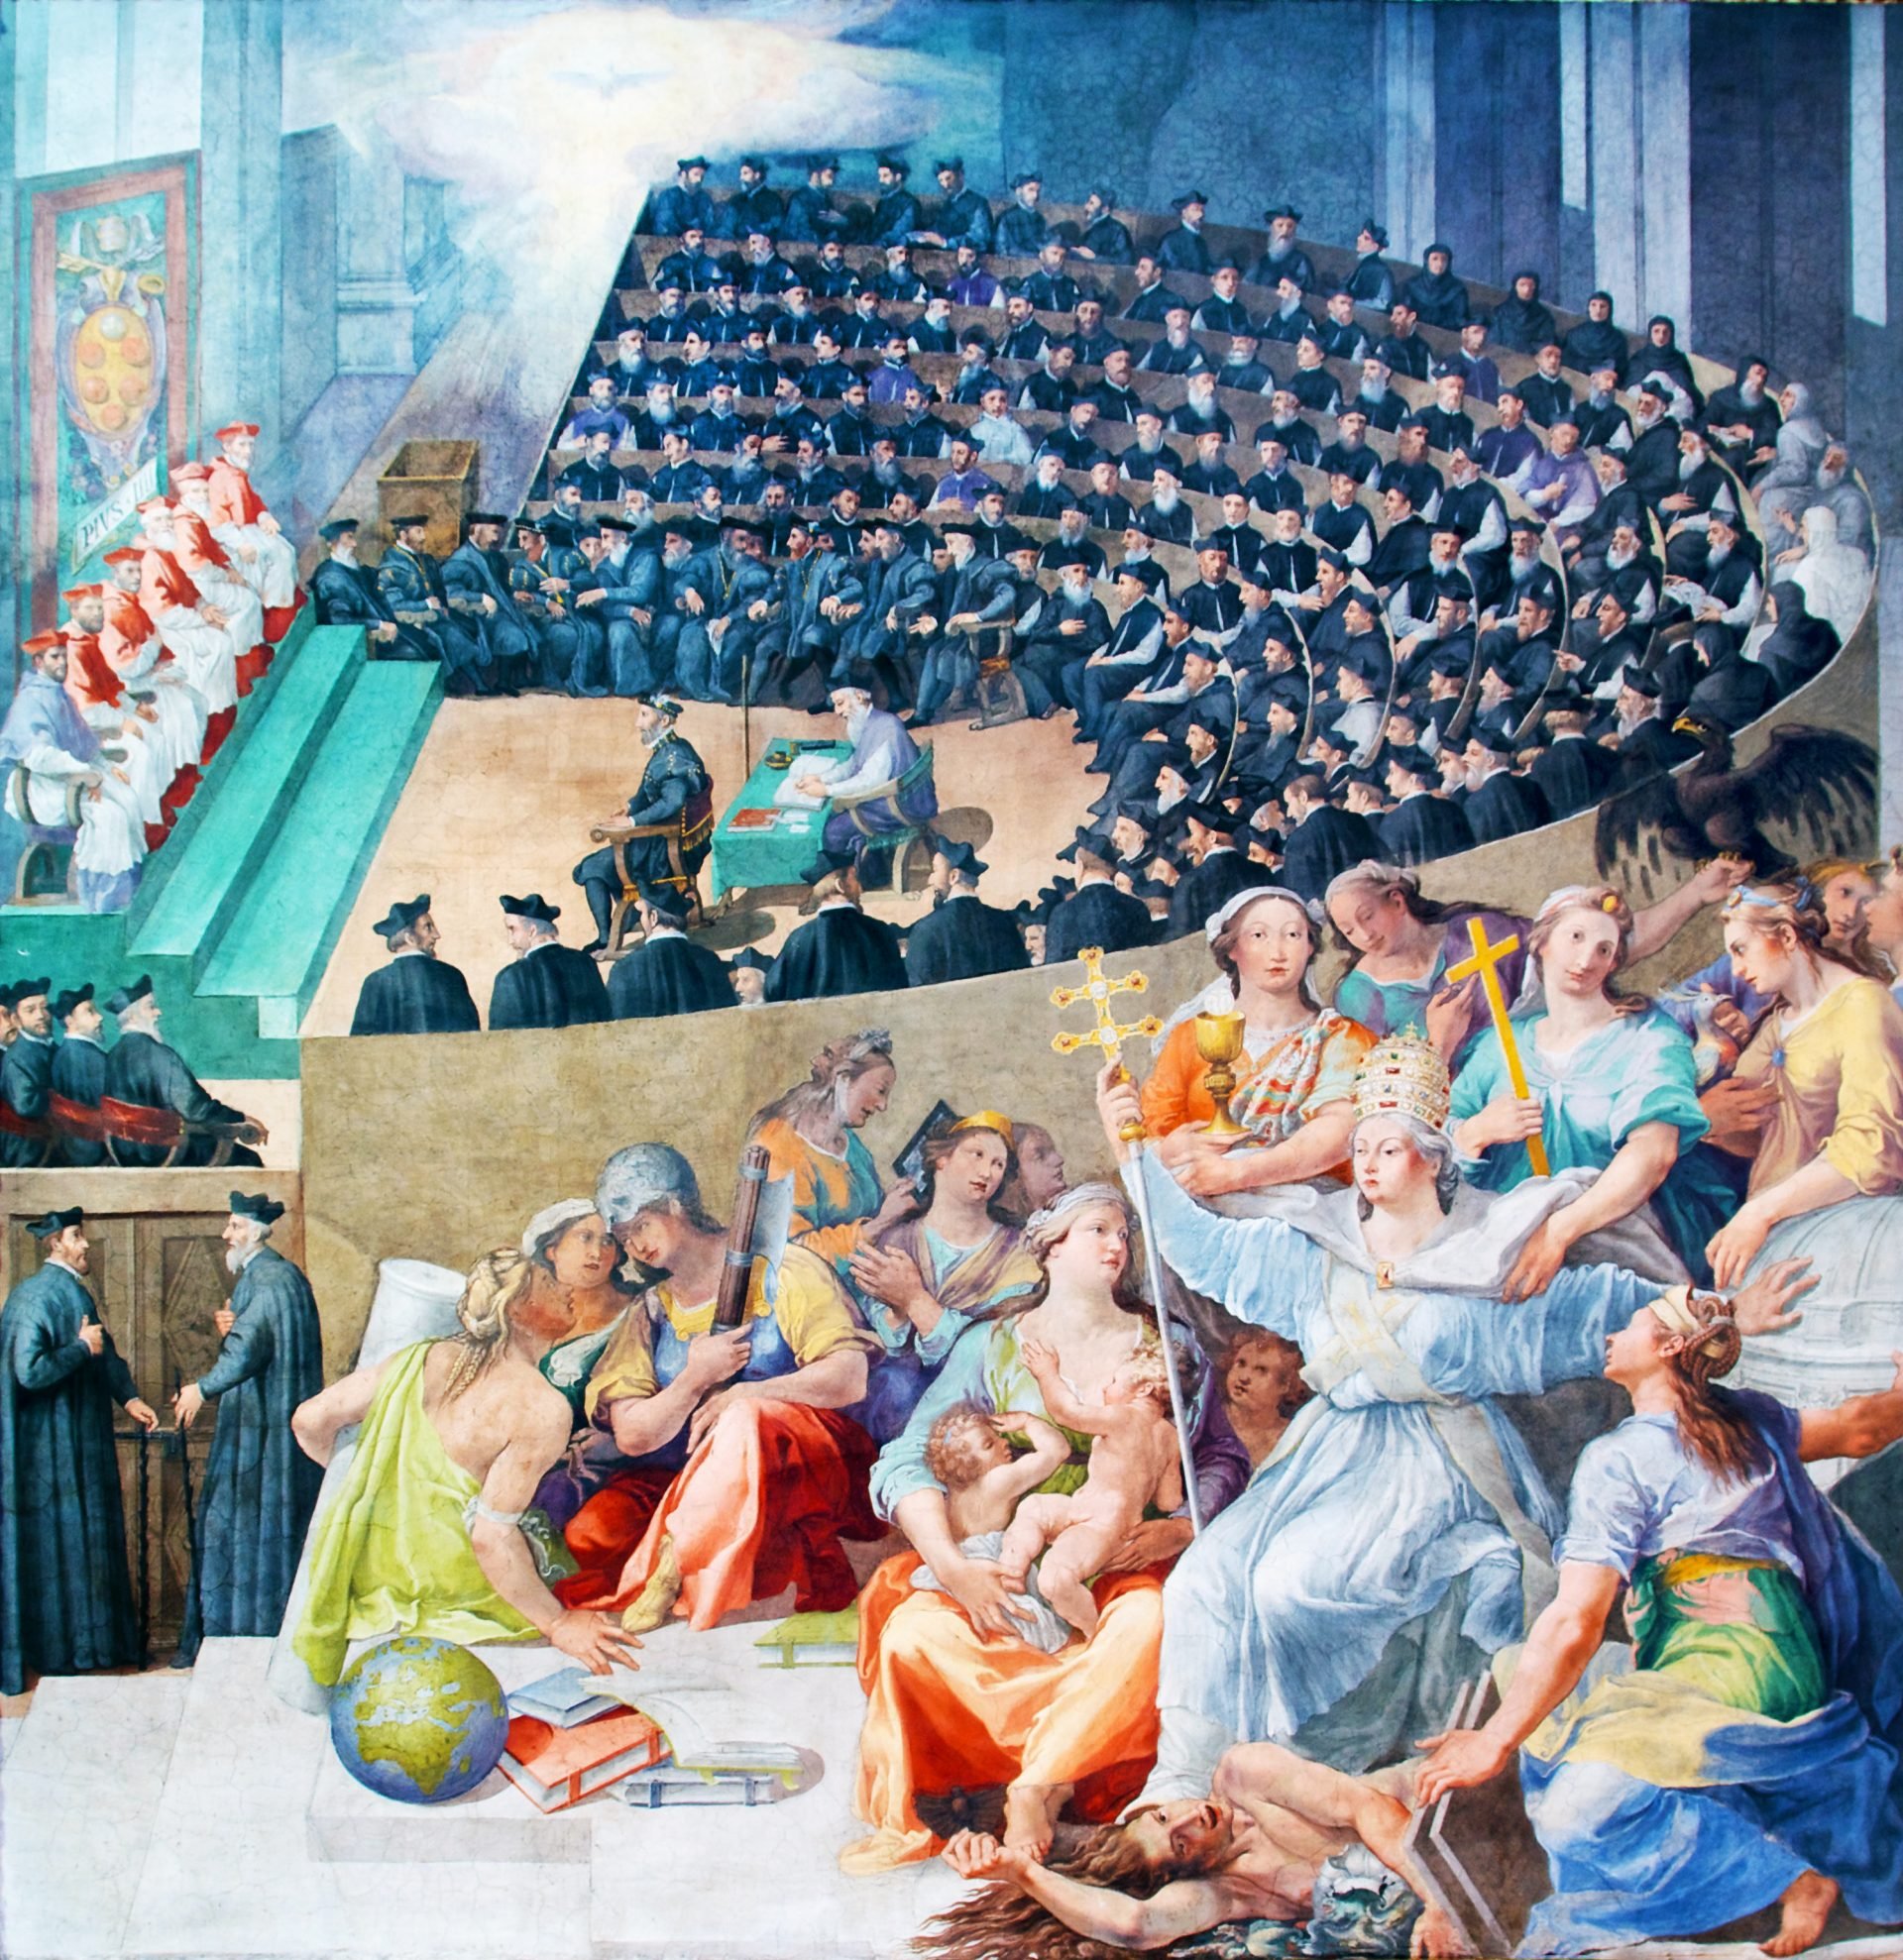 A detailed painting representing the Council of Trent. The top left section portrays a structured assembly of clerics and theologians, dressed in dark robes, seated in tiered rows, attentively focusing on the proceedings. A group of high-ranking church officials, dressed in bright red, occupy a prominent section, overseeing the assembly. Below them, to the left, smaller groups of clerics engage in discussions, with books and scrolls evident. On the right, a contrasting scene unfolds: ethereal figures, possibly allegorical representations or saints, are depicted in vibrant colors and draped in classical attire. They hold religious symbols like crosses and staves. Among them, a central female figure, adorned in a flowing robe, holds a golden cross aloft. Surrounding her, other figures display various expressions of reverence, devotion, and inspiration. Objects like a globe and books are scattered in the foreground, symbolizing knowledge and the universality of the church.